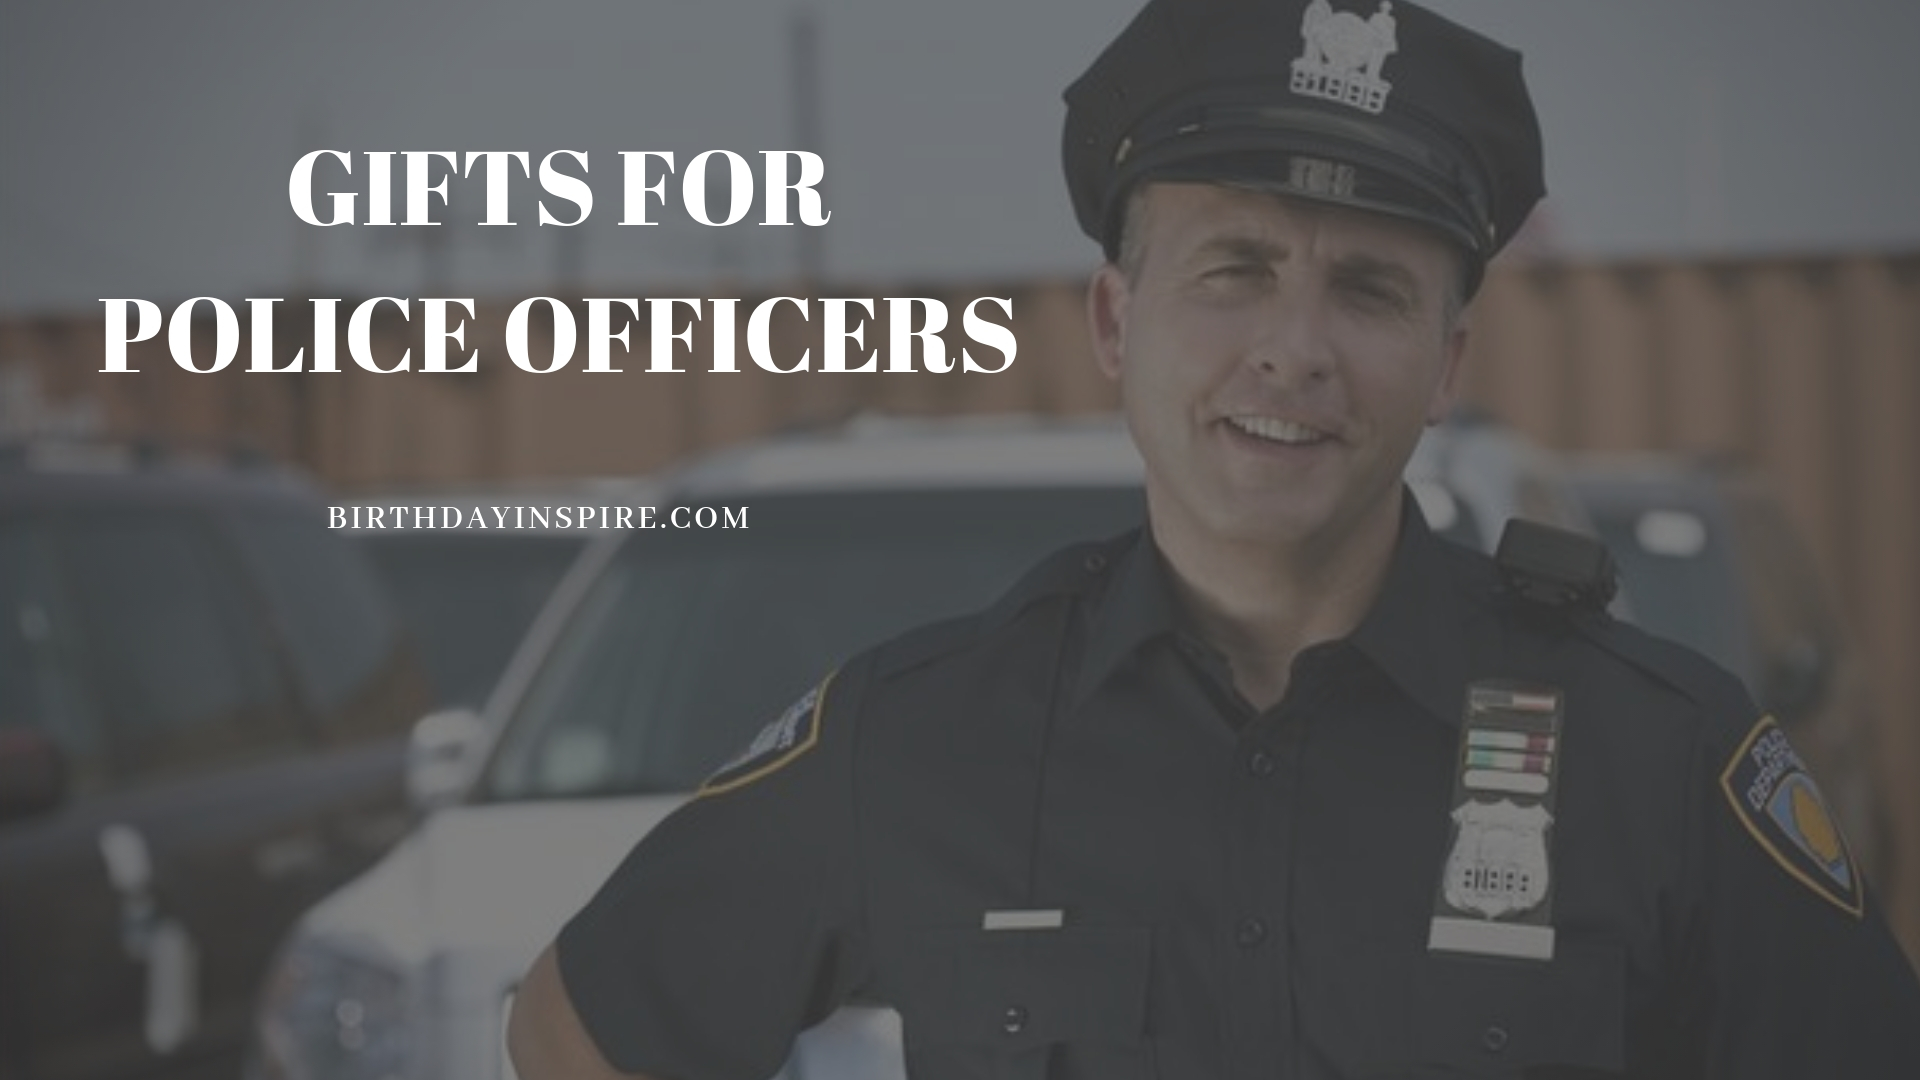 GIFTS FOR POLICE OFFICERS